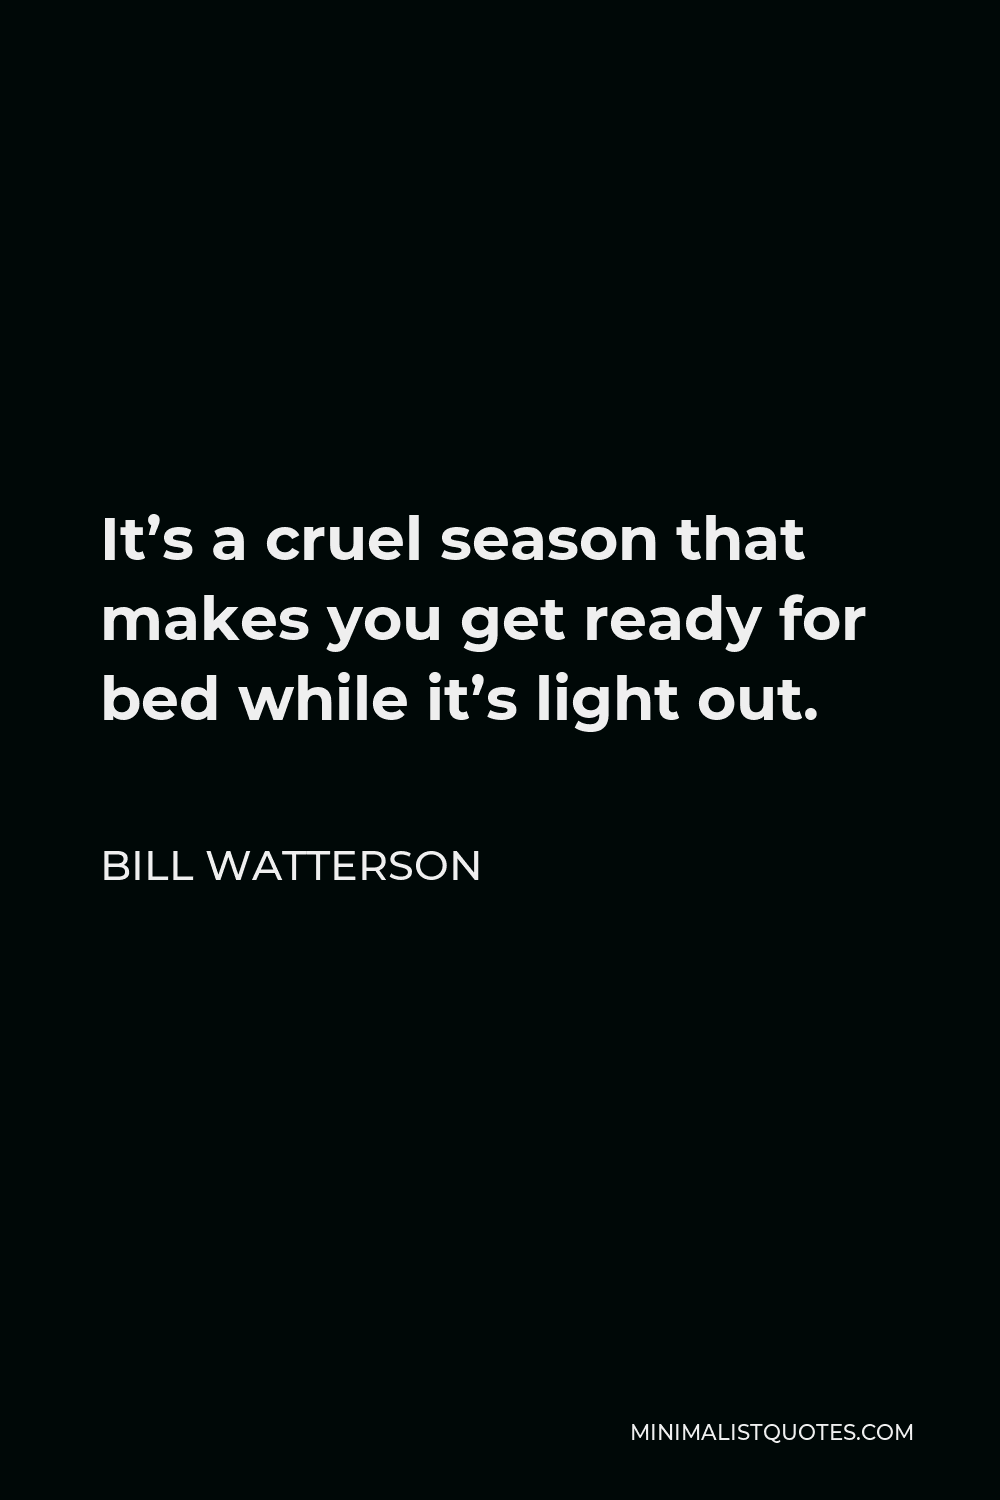 Bill Watterson Quote - It’s a cruel season that makes you get ready for bed while it’s light out.